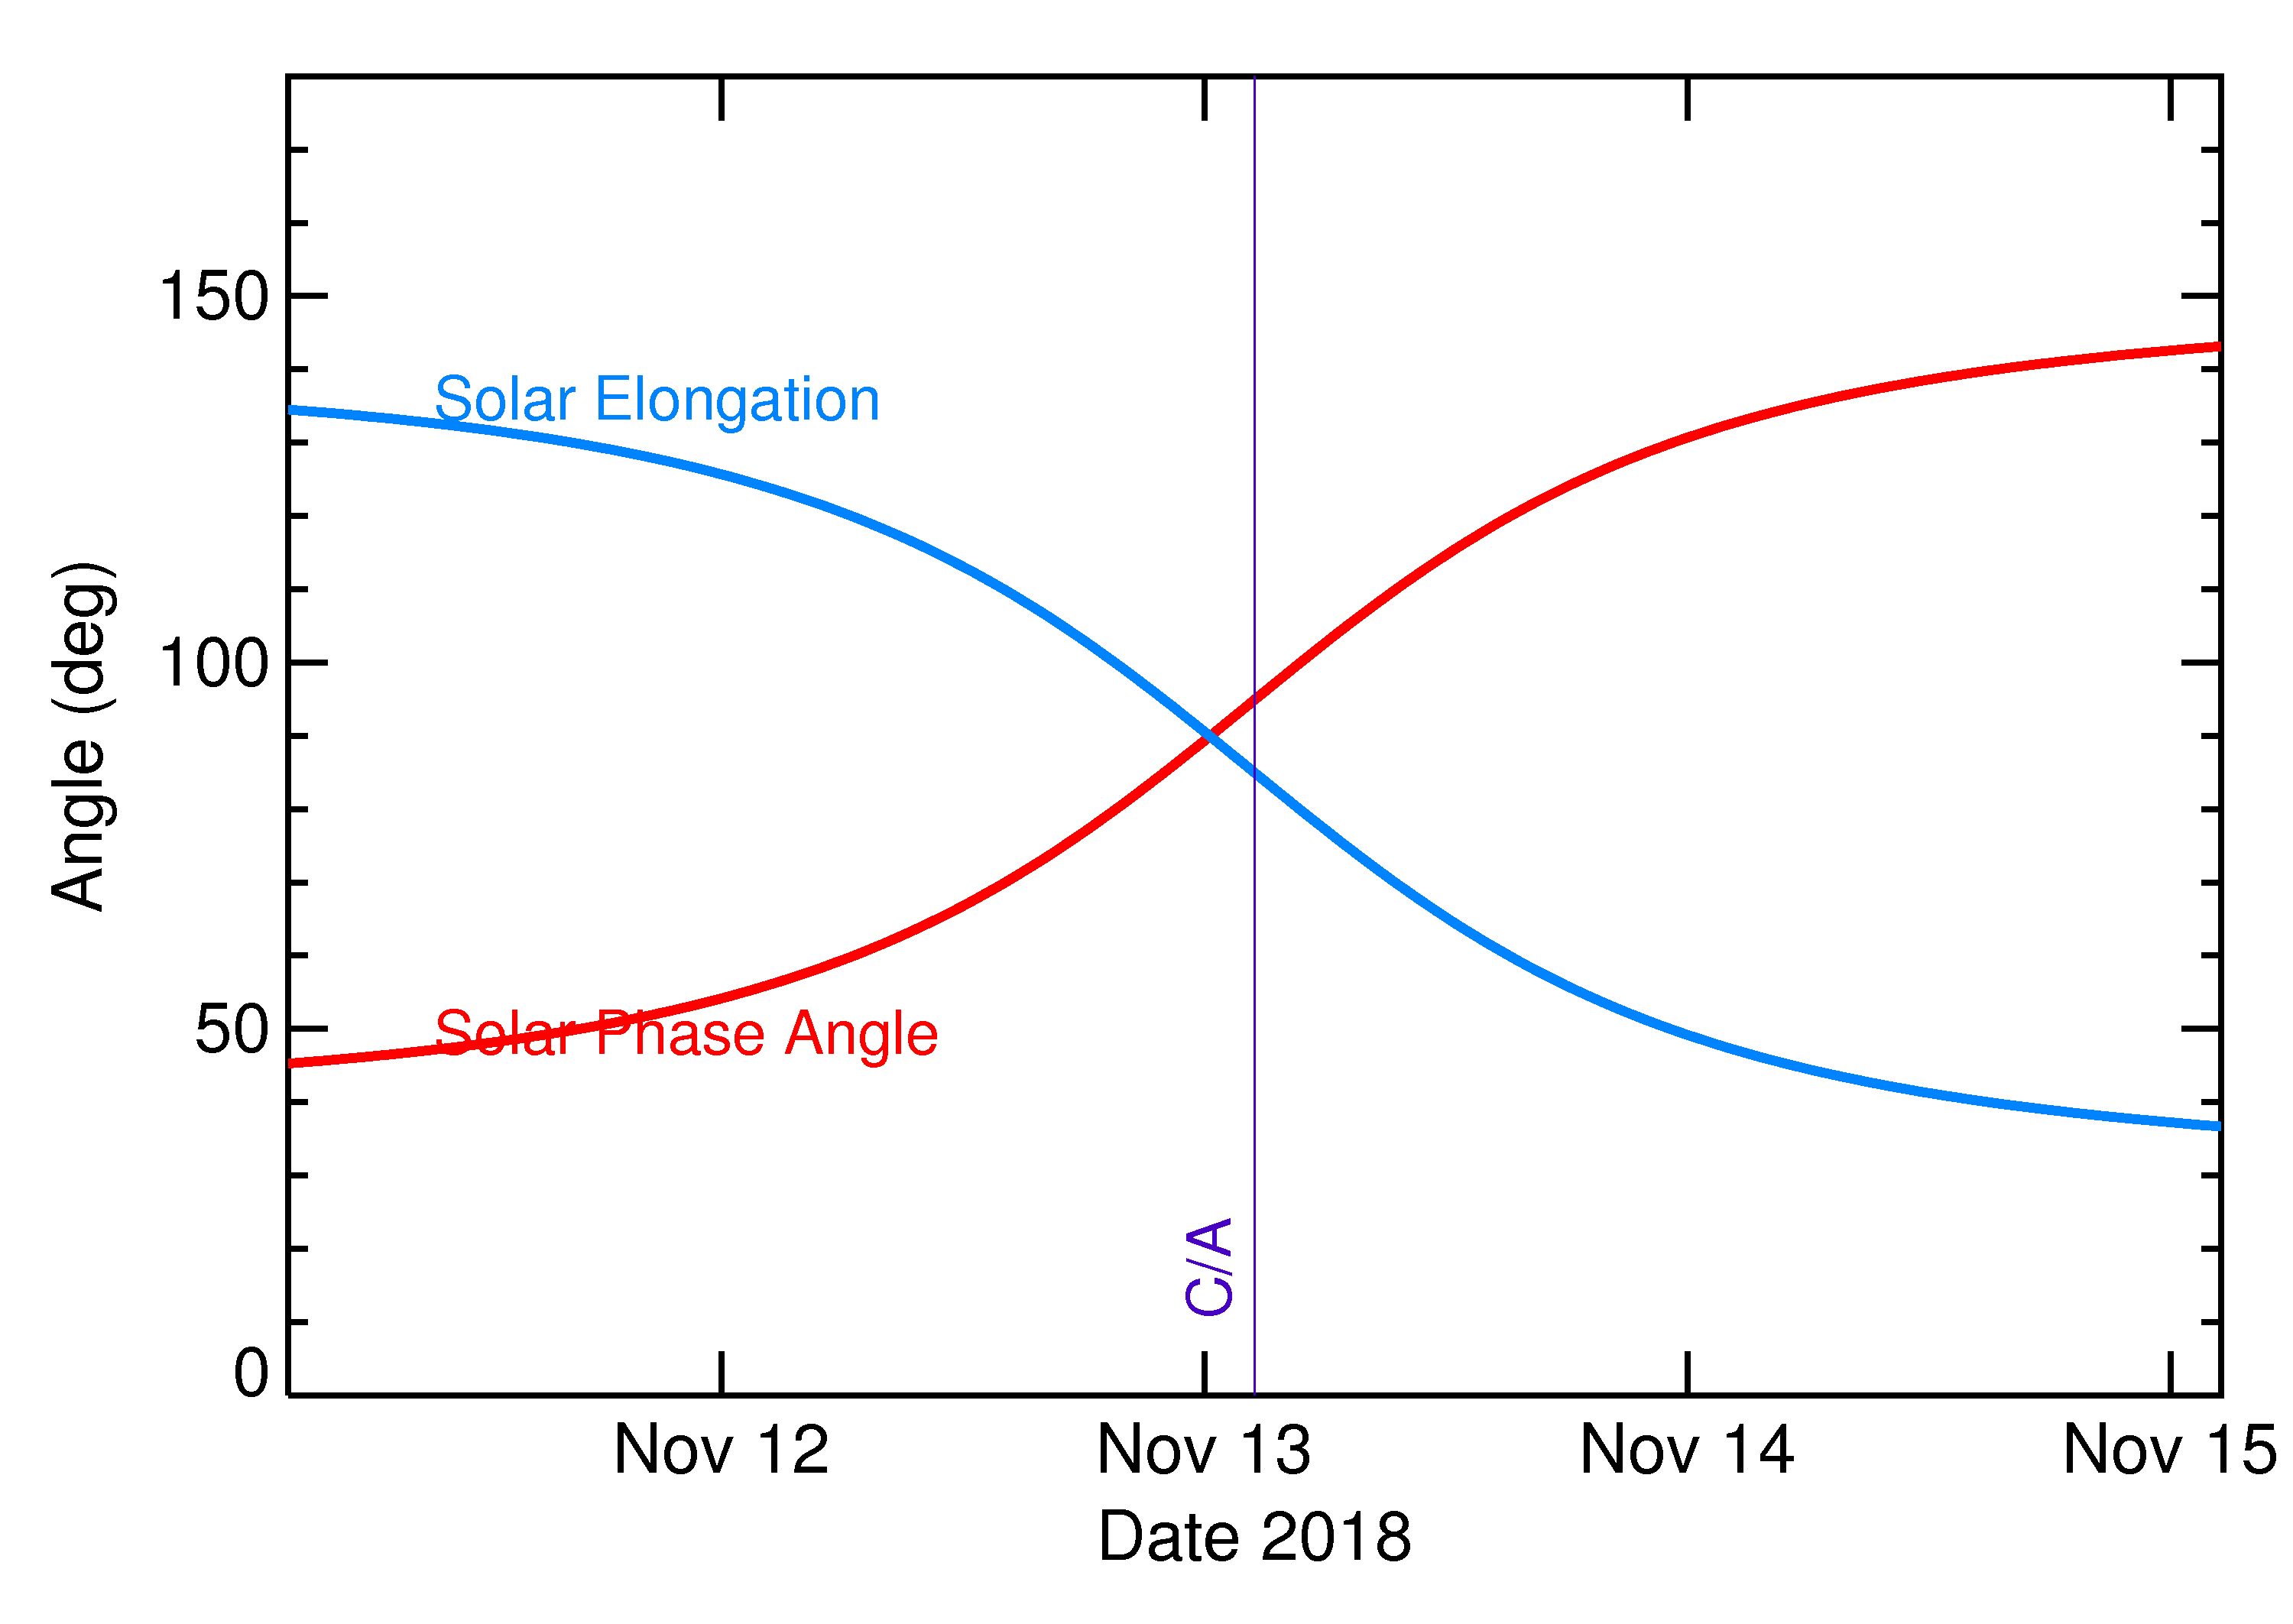 Solar Elongation and Solar Phase Angle of 2018 VC7 in the days around closest approach